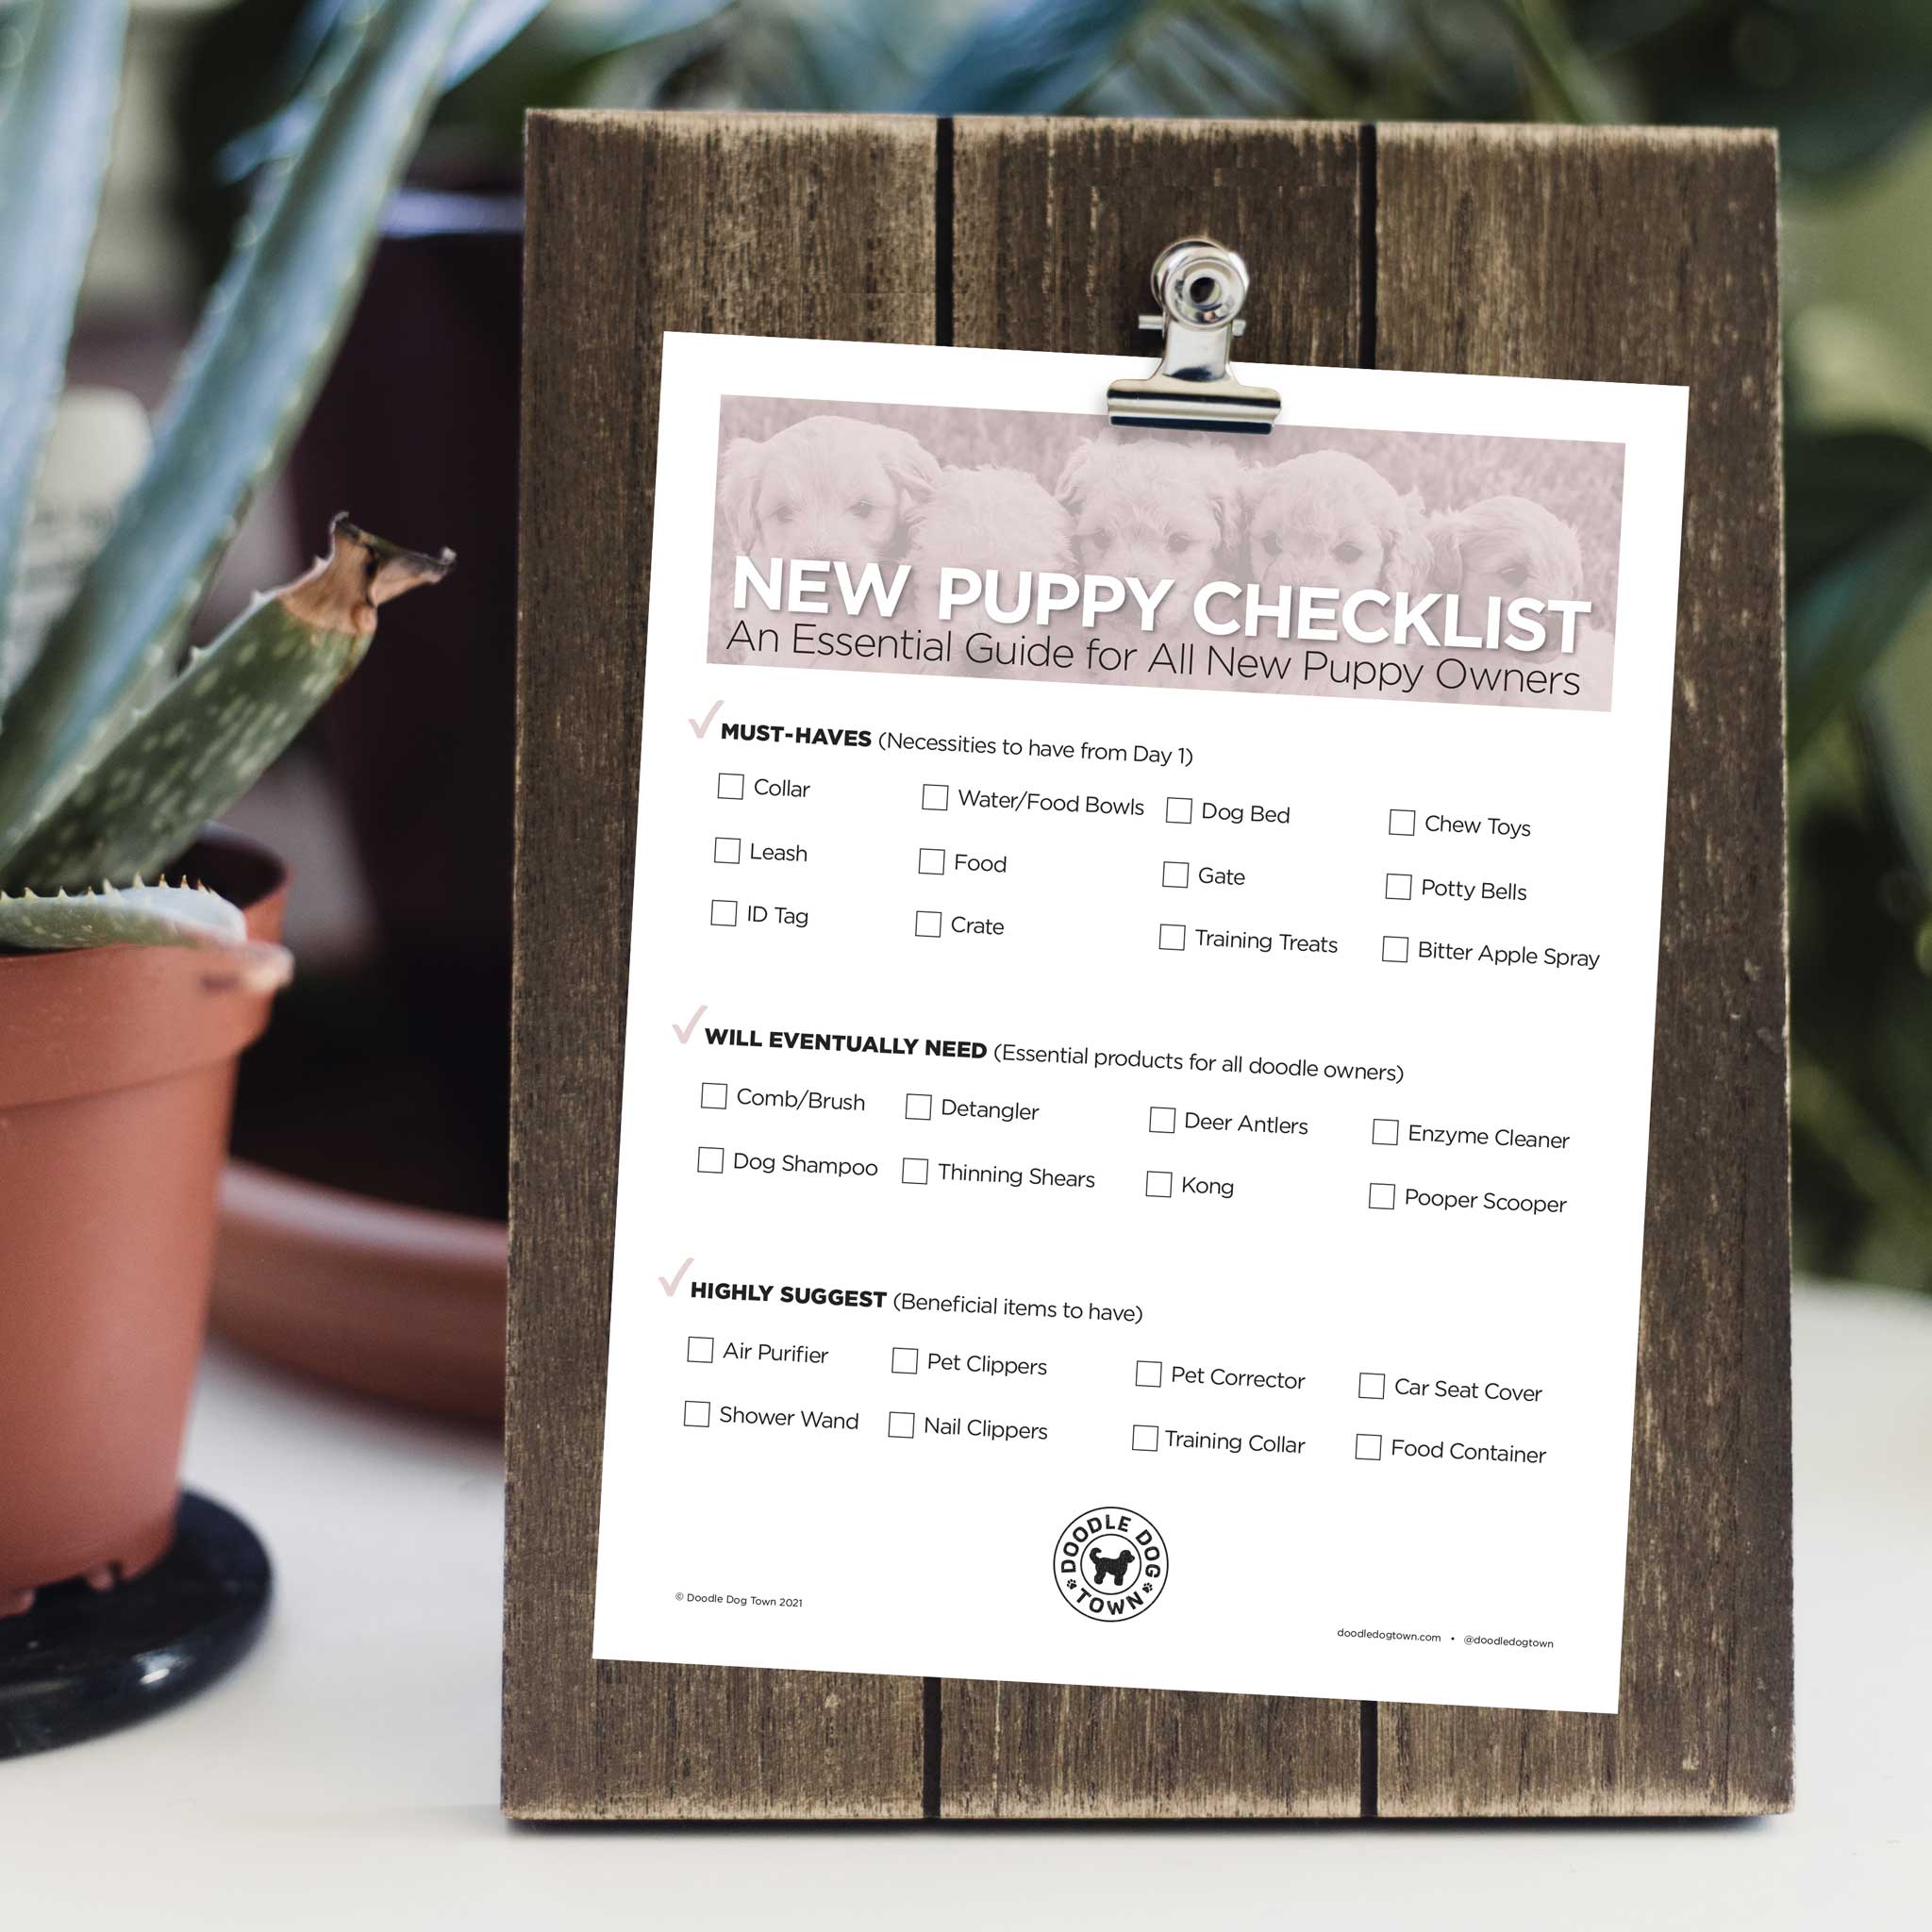 New Puppy Checklist sheet on wooden plank clipboard surrounded by plants